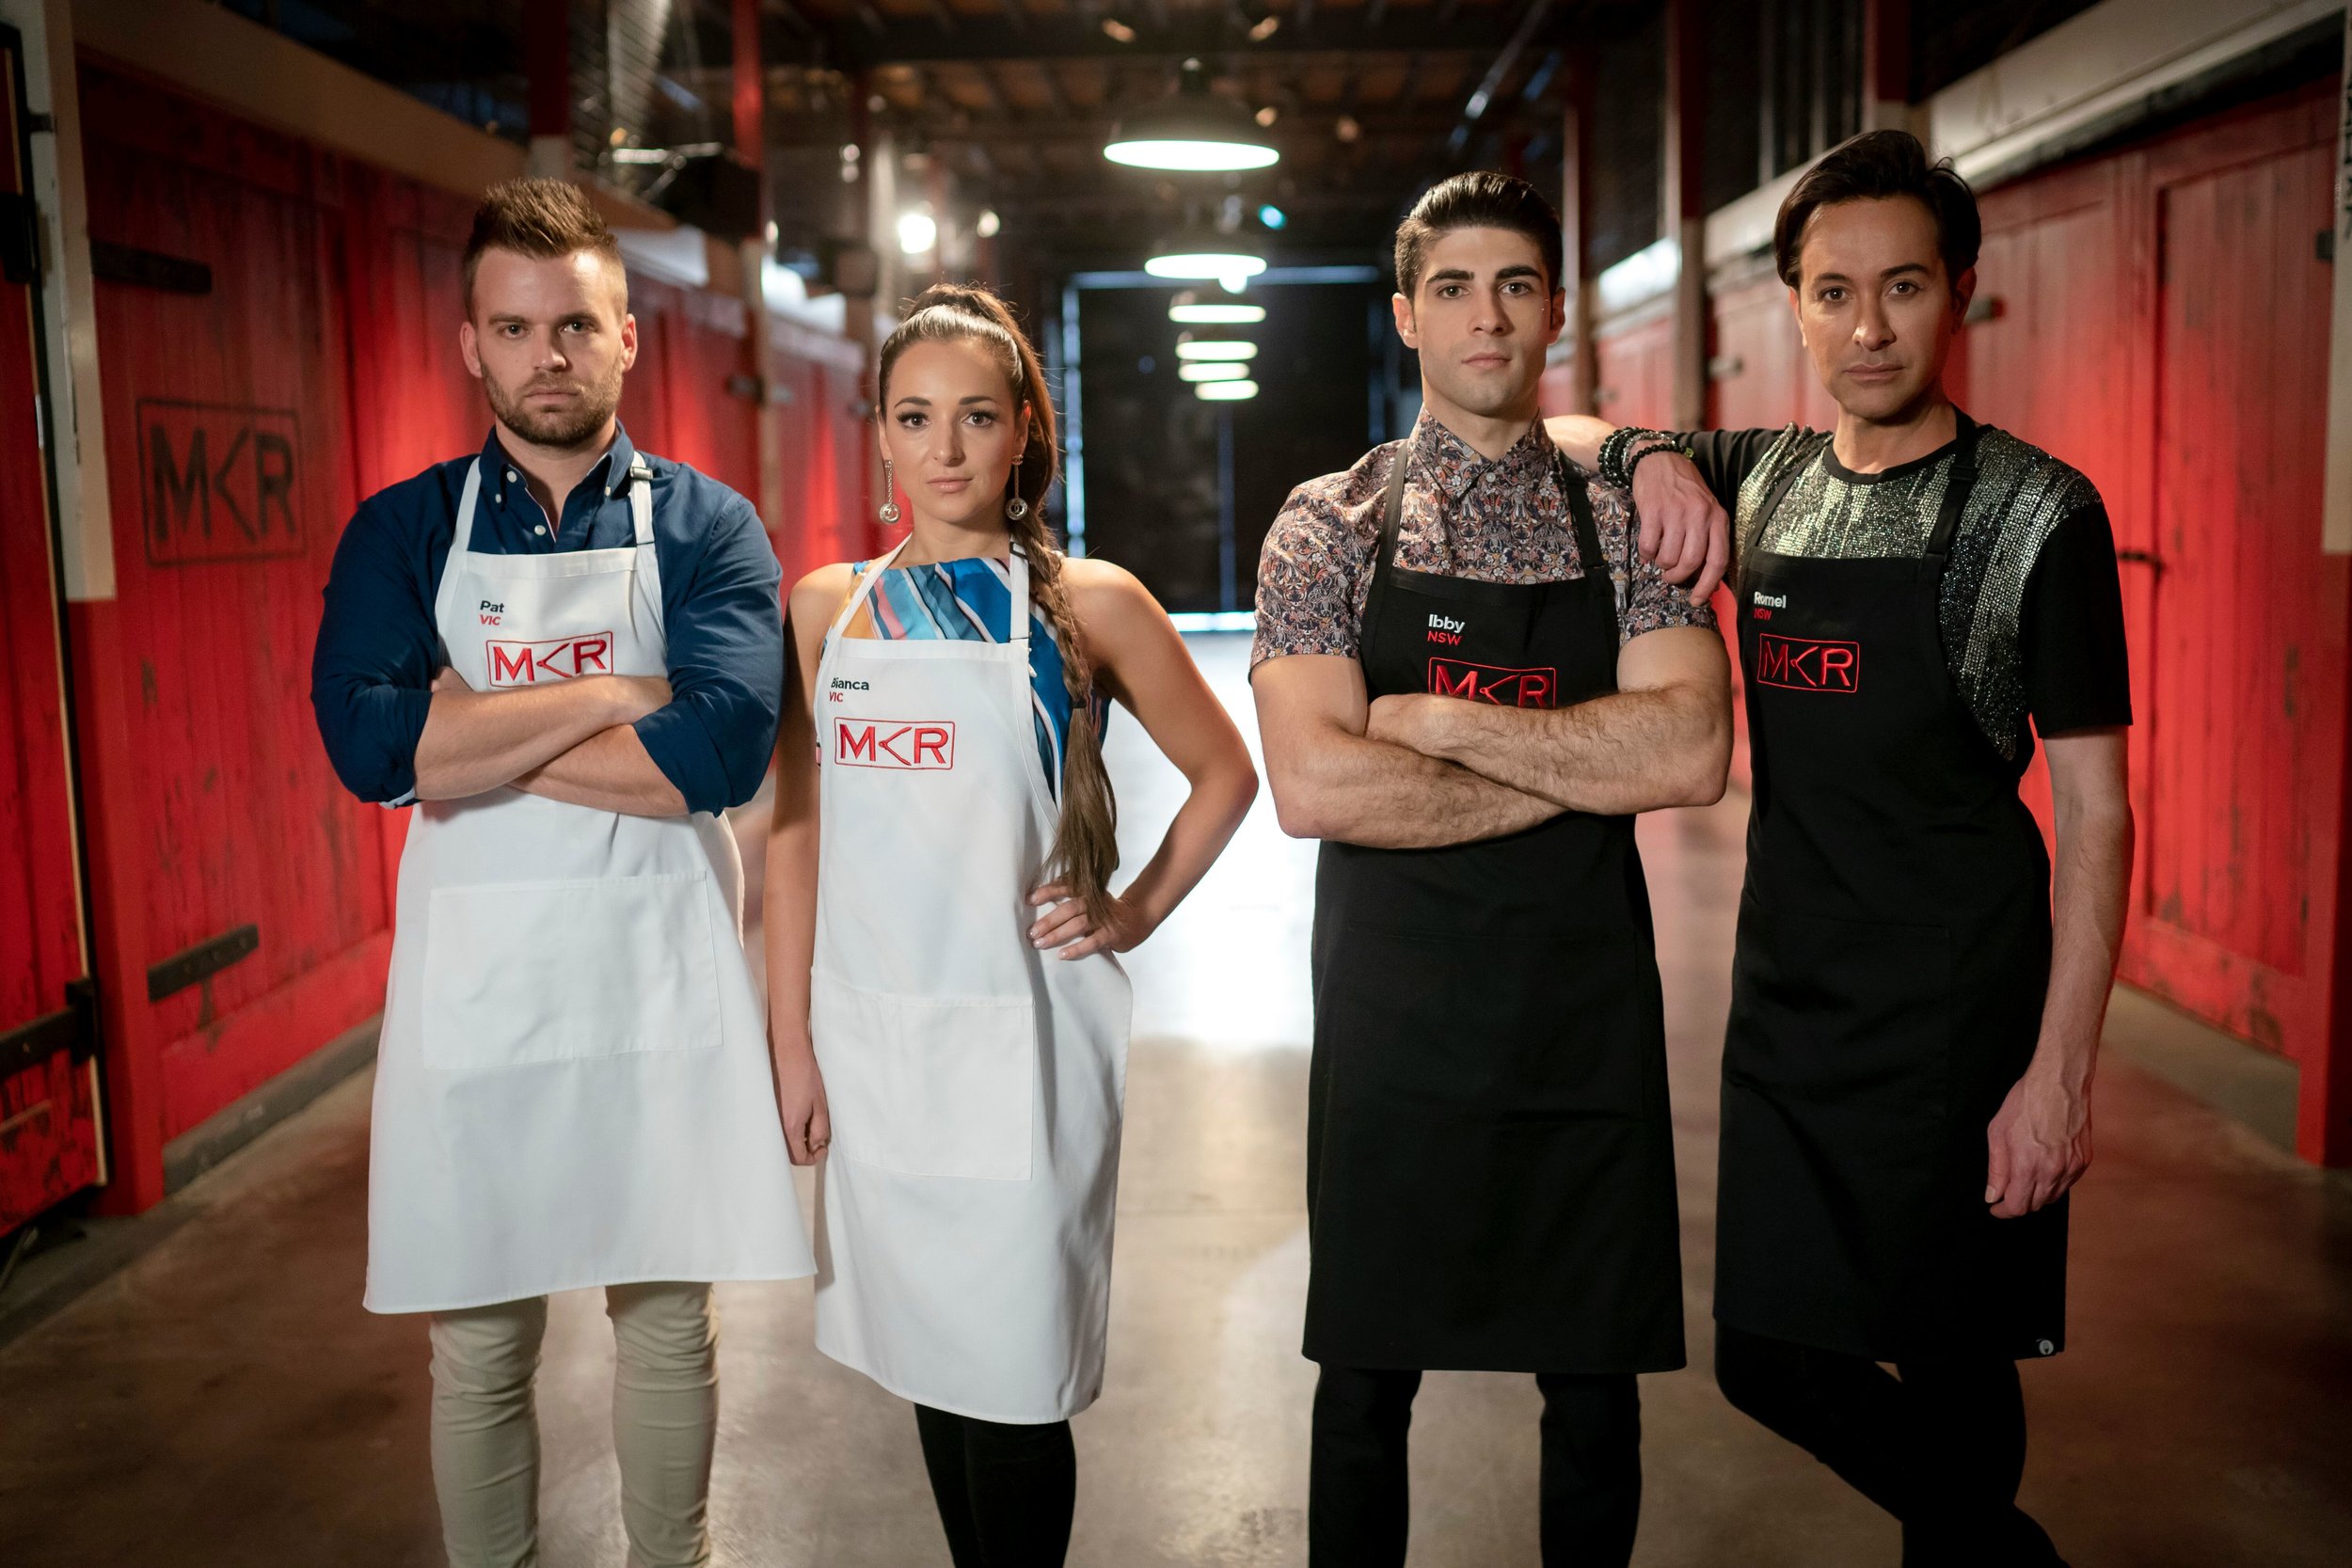   My Kitchen Rules  Source: Seven Network 